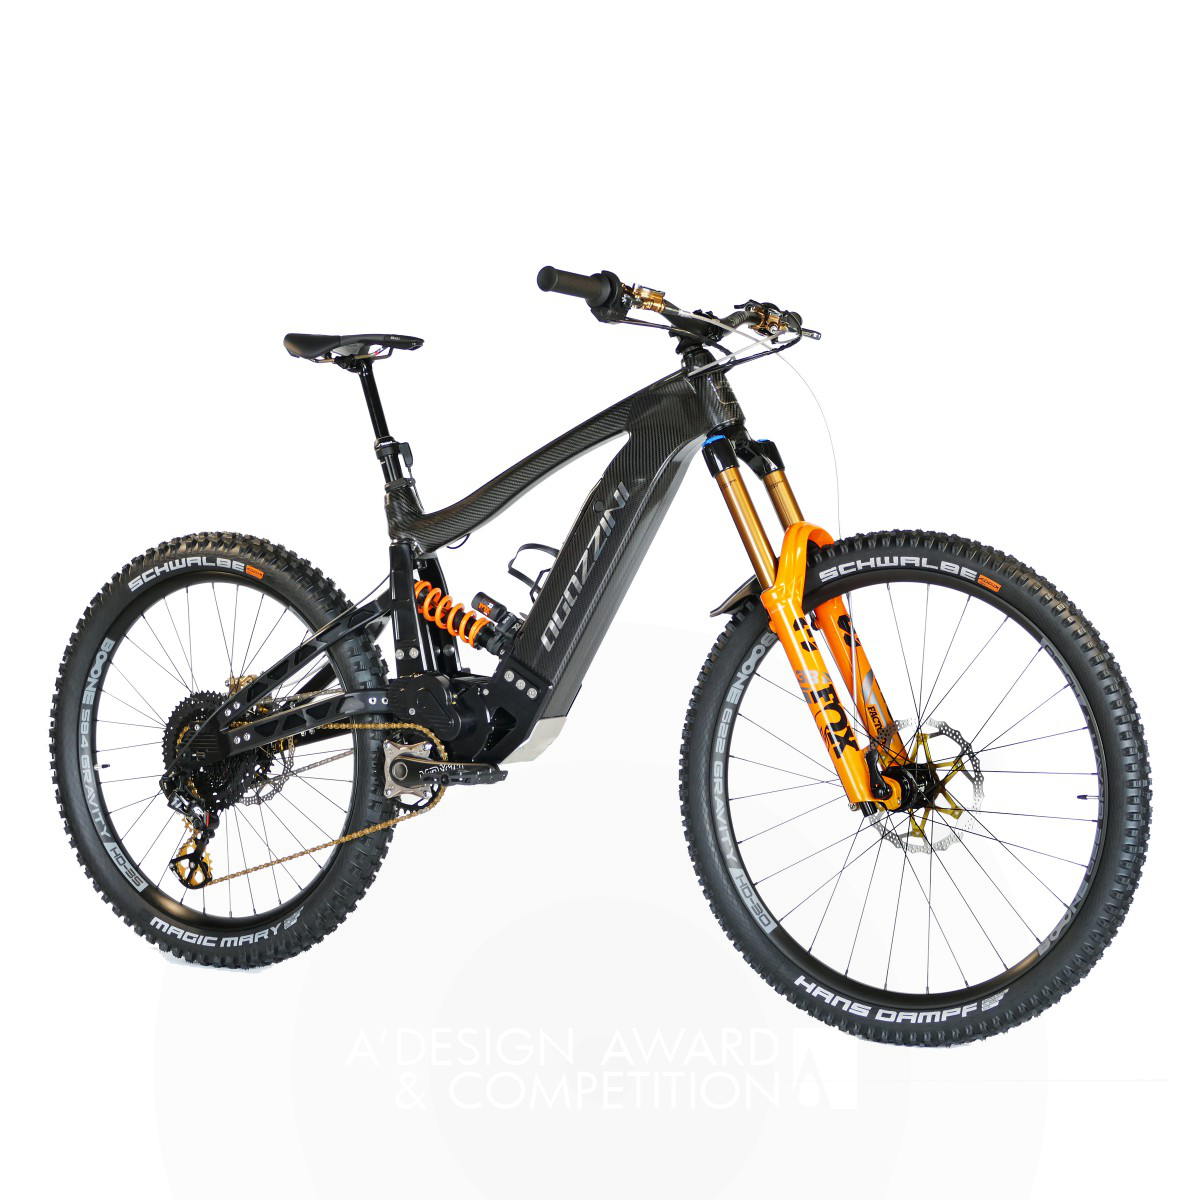 Enduro2: Redefining Off-Road Mobility